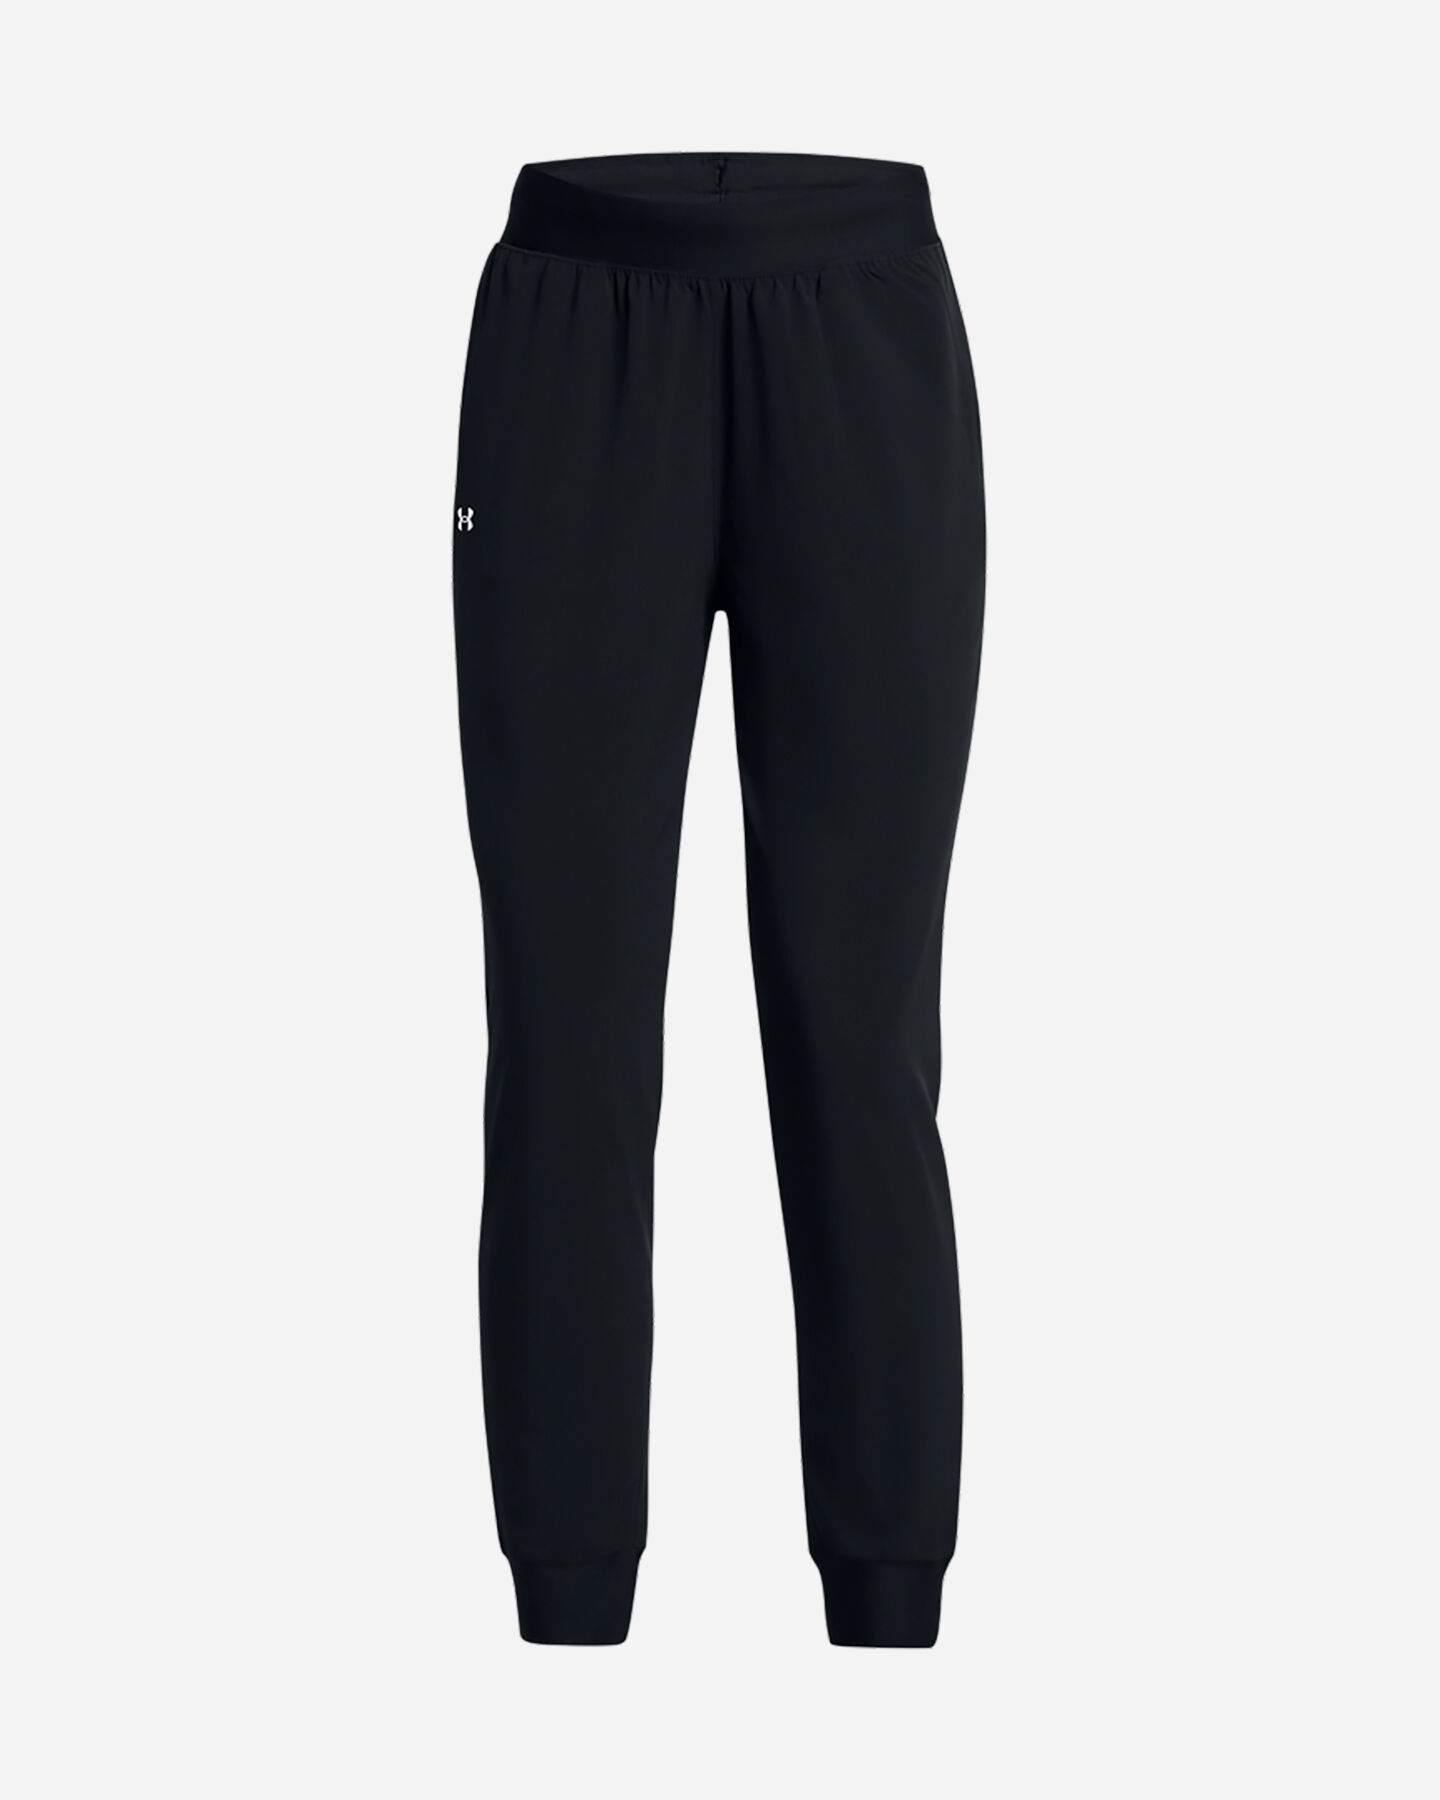  Pantalone UNDER ARMOUR WOVEN W S5641550|0001|XS scatto 0